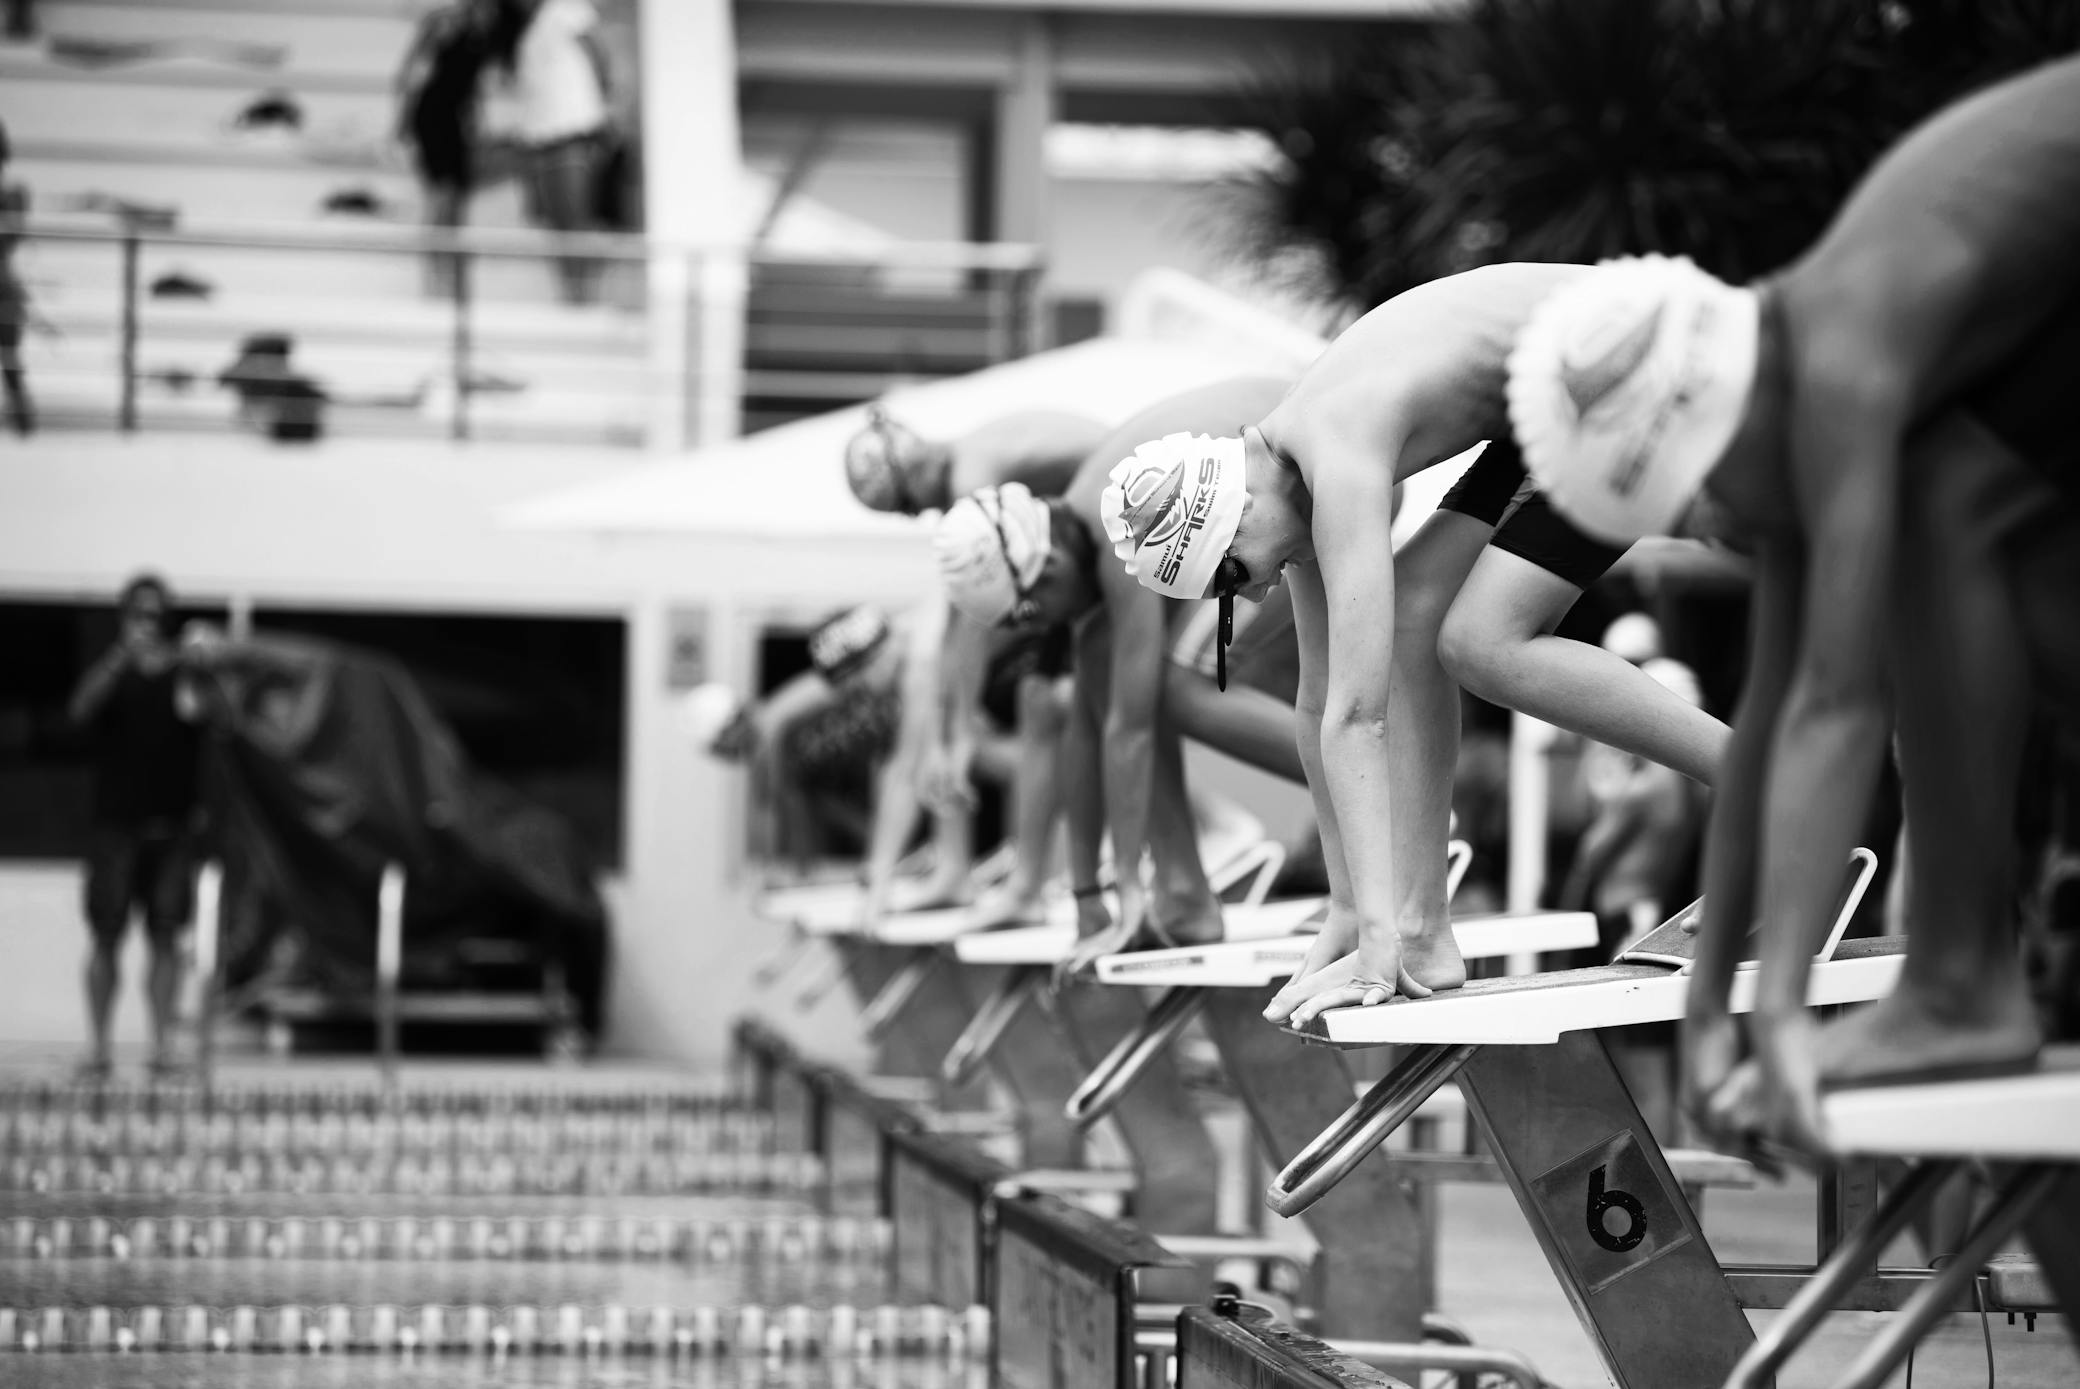 A heat of youth swimmers prepare for a race in a pool